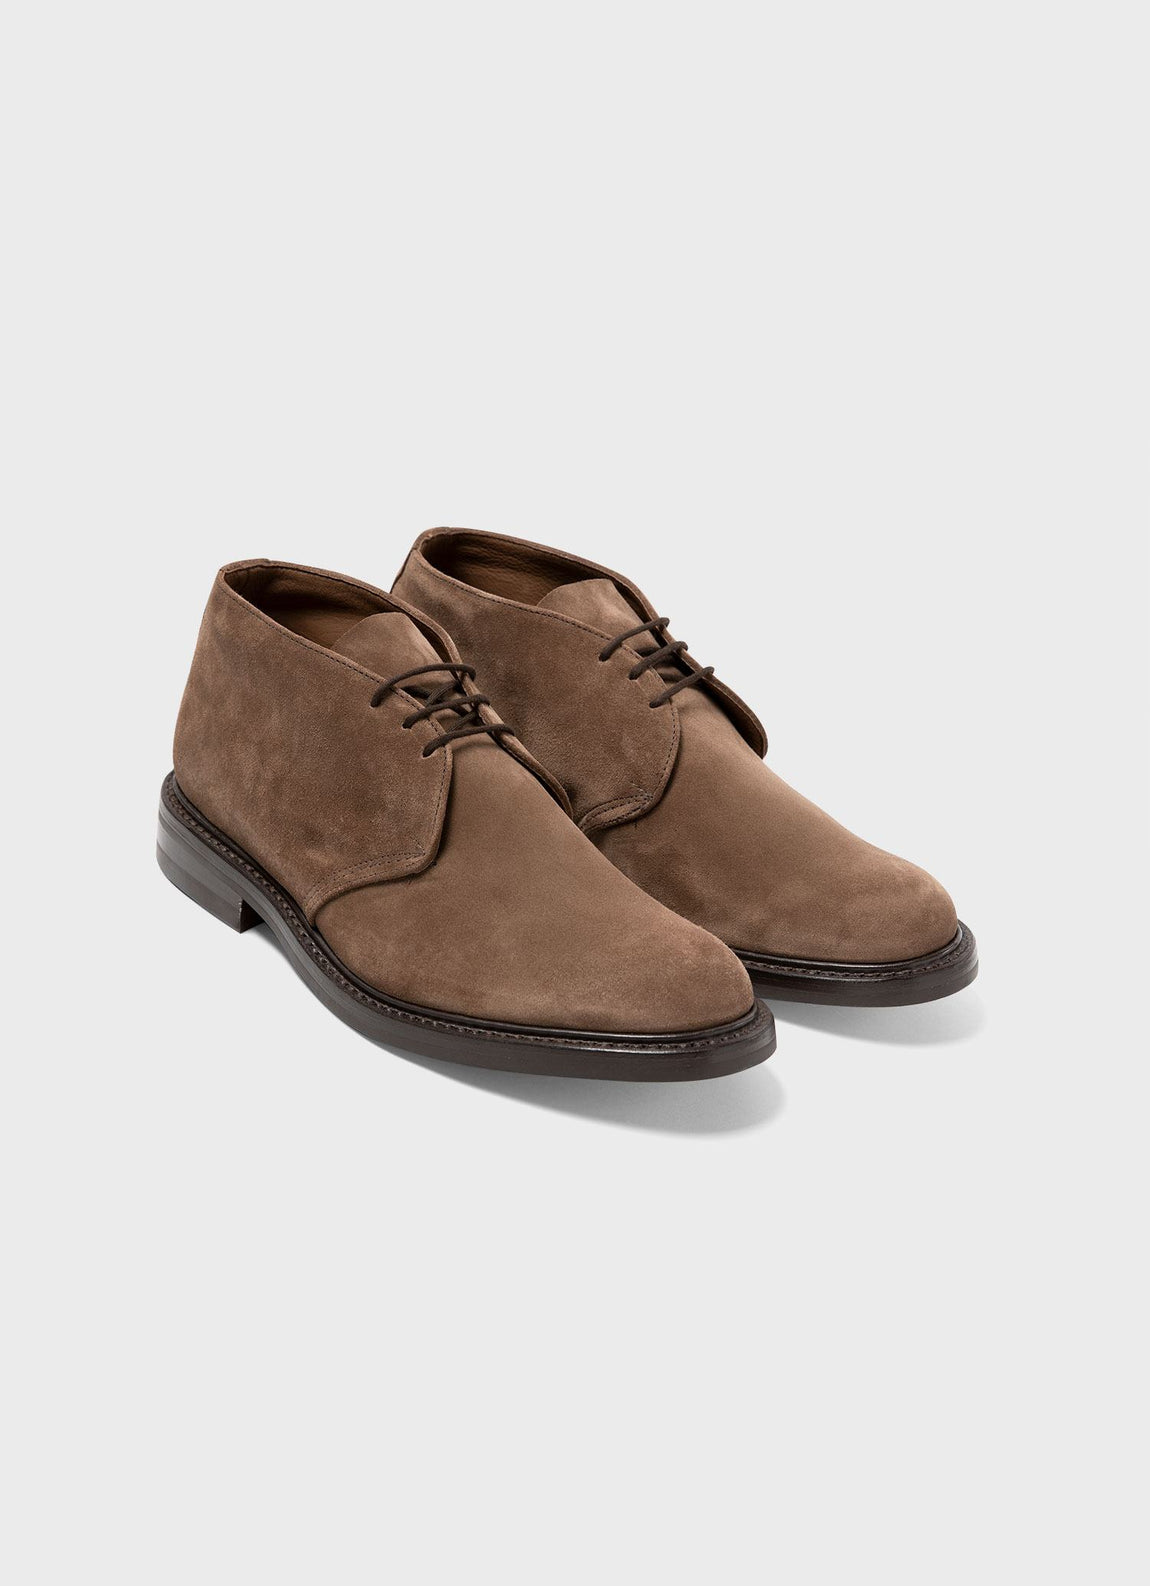 Men's Suede Ankle Boot in Light Brown